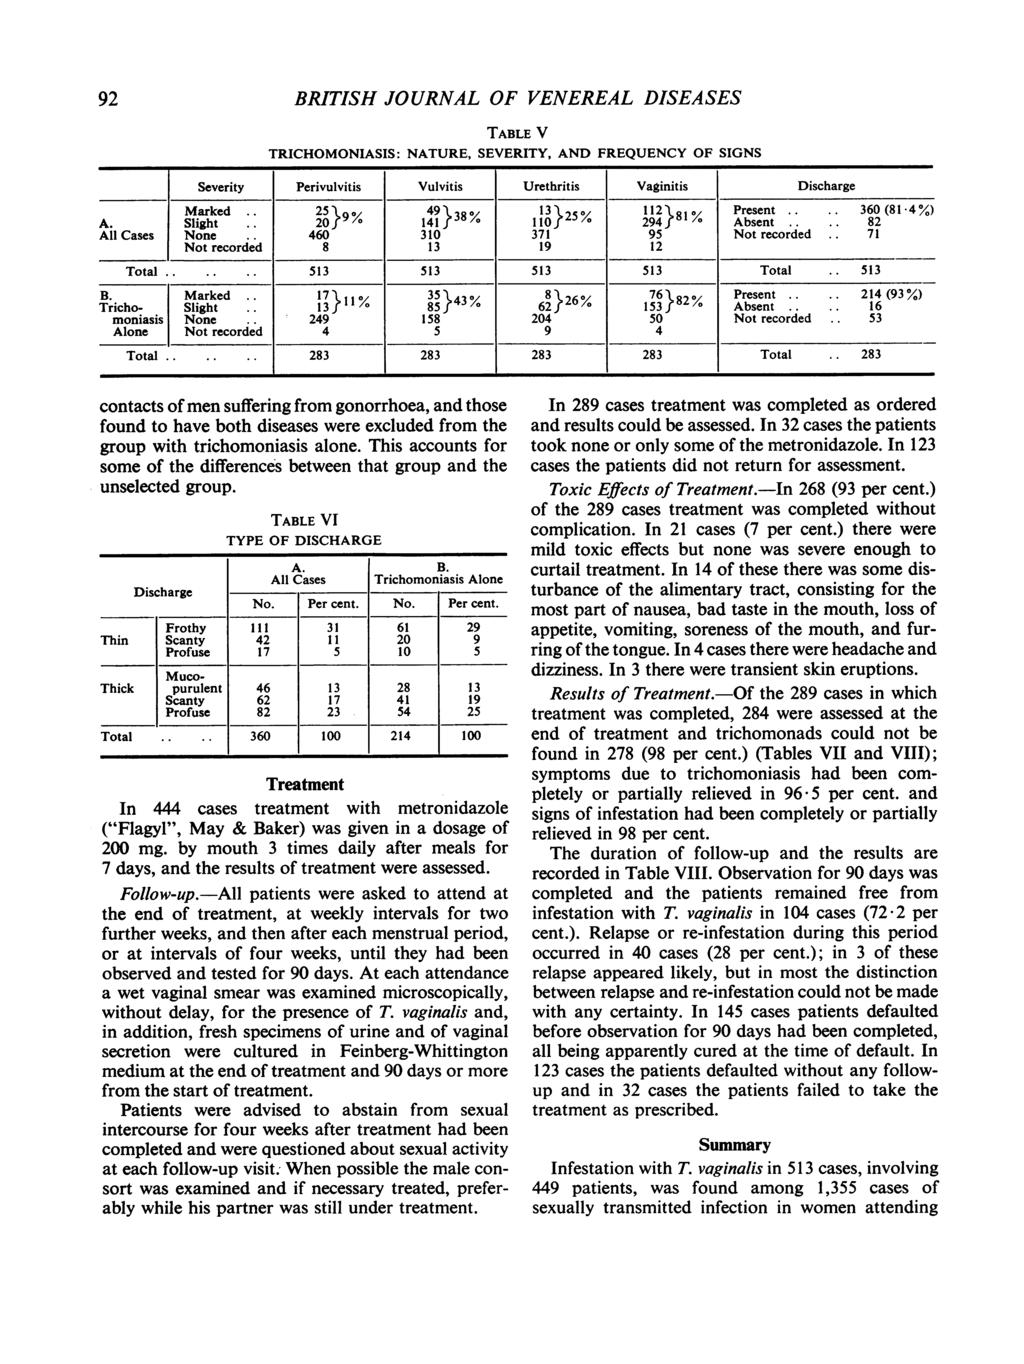 92 BRITISH JOURNAL OF VENEREAL DISEASES TABLE V TRICHOMONIASIS: NATURE, SEVERITY, AND FREQUENCY OF SIGNS Severity Perivulvitis Vulvitis Urethritis Vaginitis Discharge Marked 25A9 49l 38 13 2l5 112